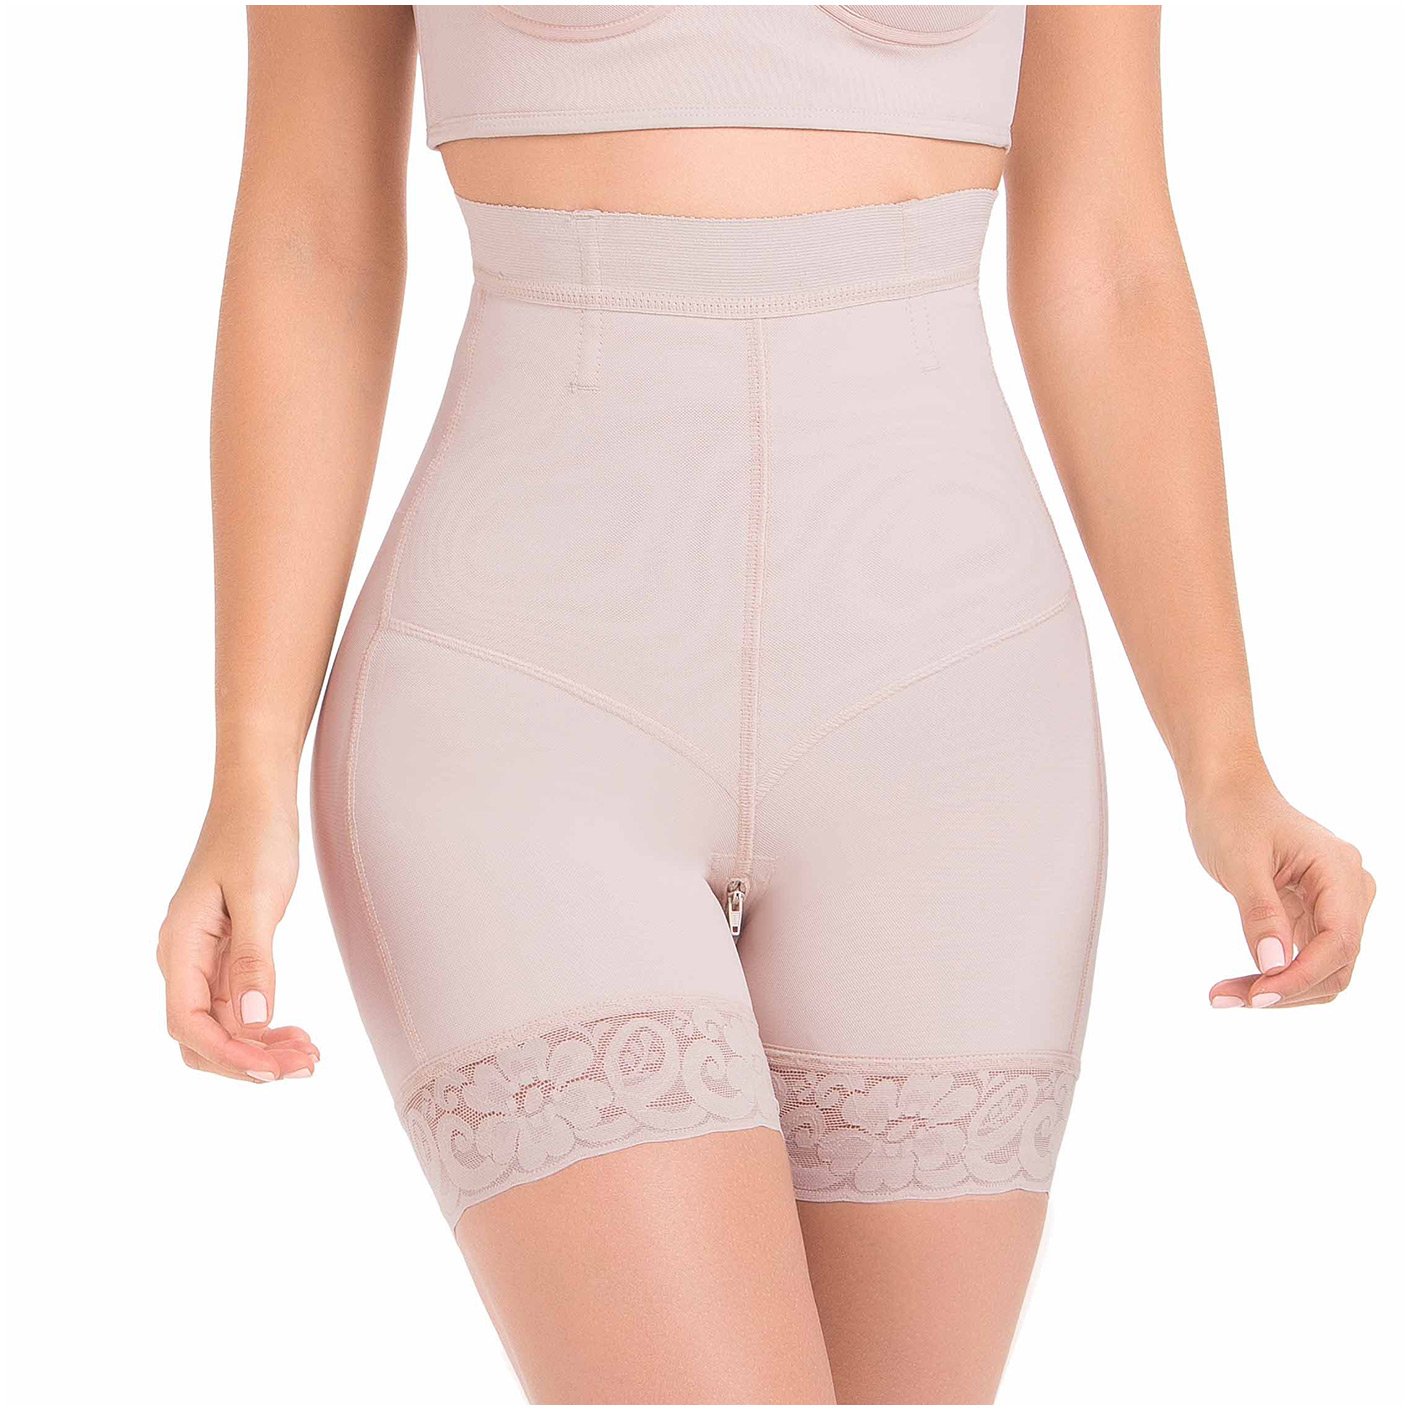 MariaE Fajas 9549 | Ideal Girdle High-Waist Shorts for Women | Daily Use Body Shaper with Butt Lift & Tummy-Control | Powernet - fajacolombian